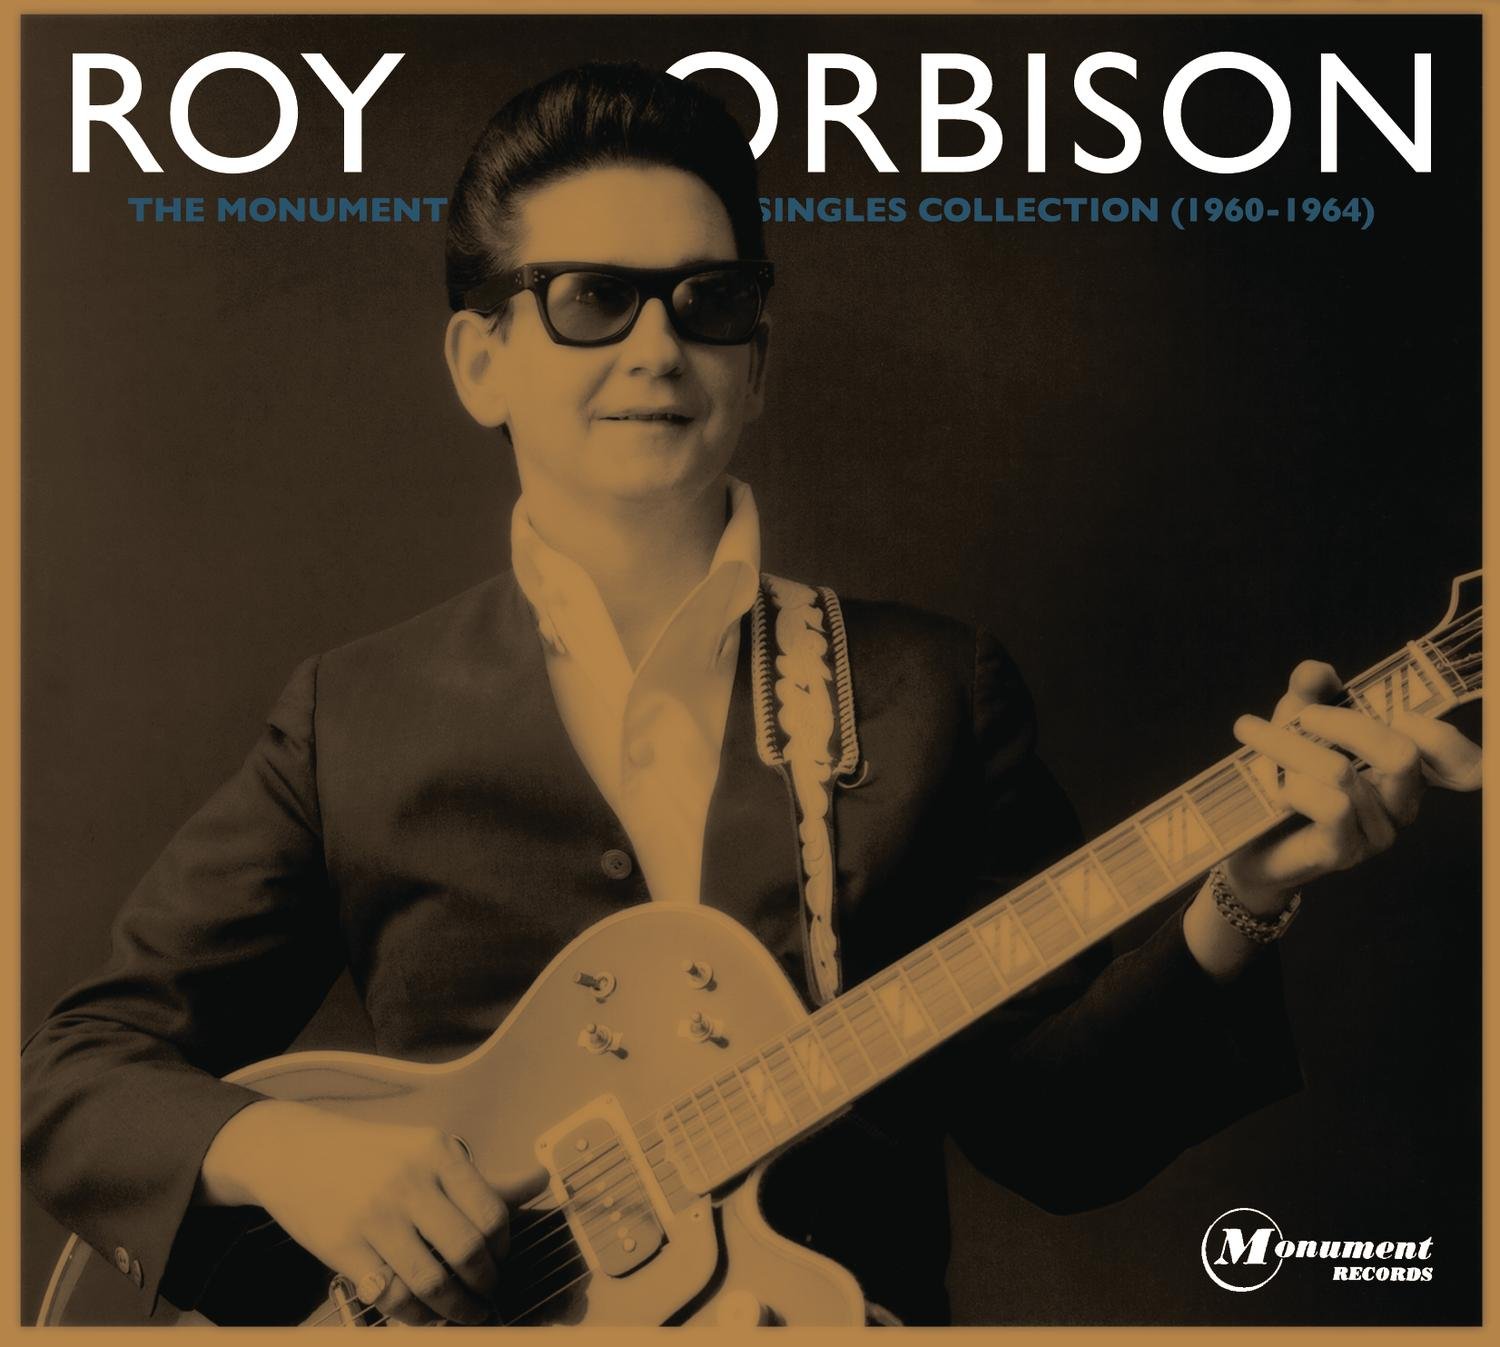 Only The Lonely Roy Orbison vinyl record memories.